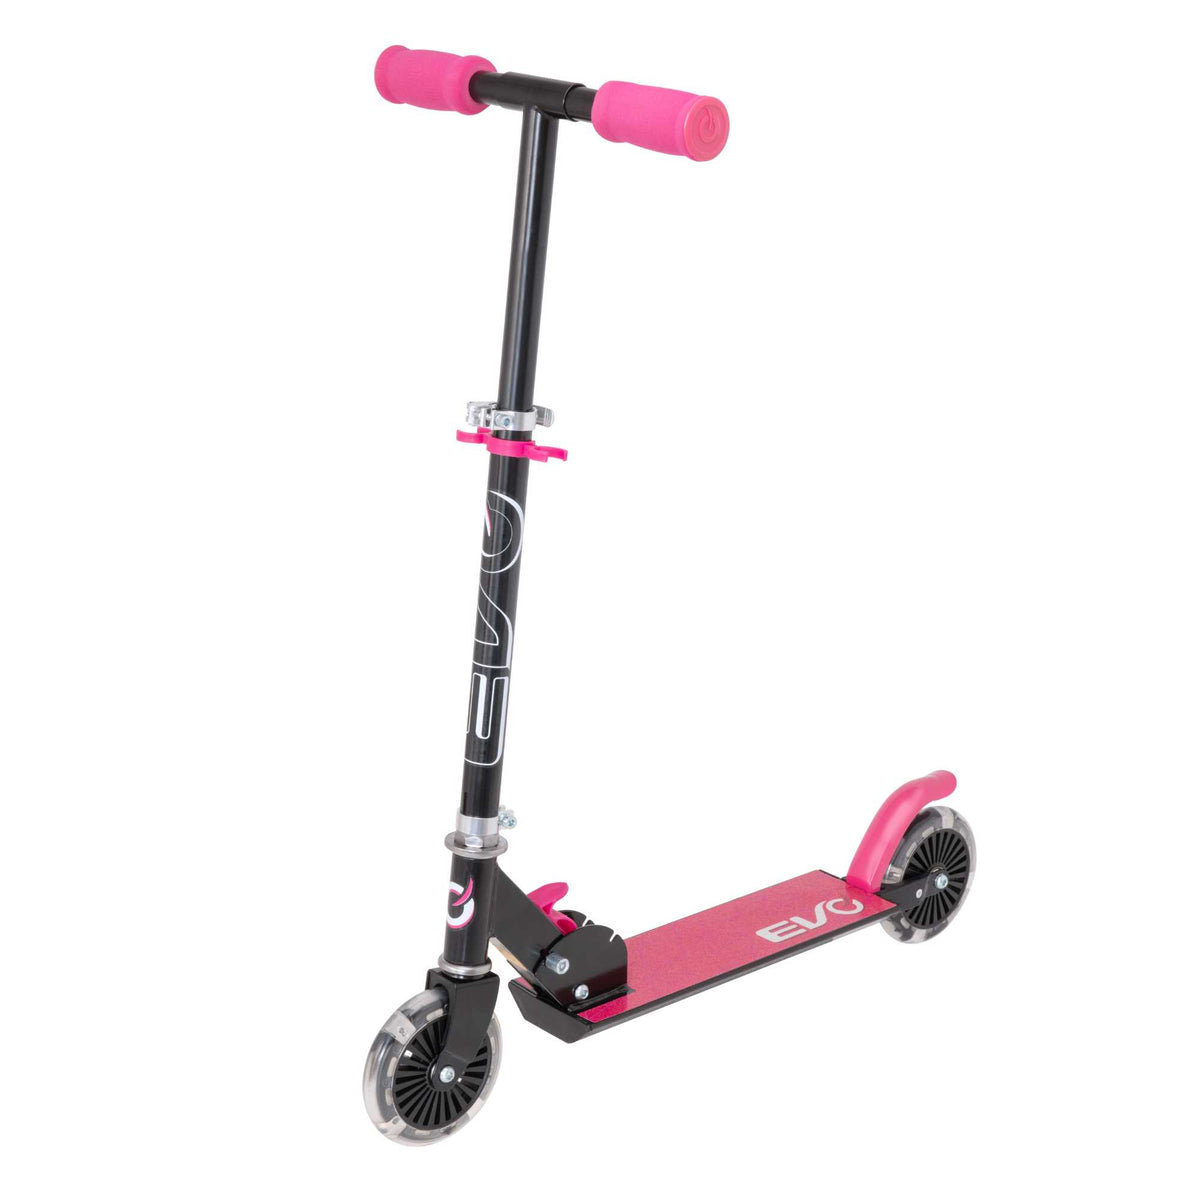 Inline Scooter, Light Up Scooter, Scooter For 5 Year Olds, Push Scooter, Two Wheeled Scooter, Folding Scooter